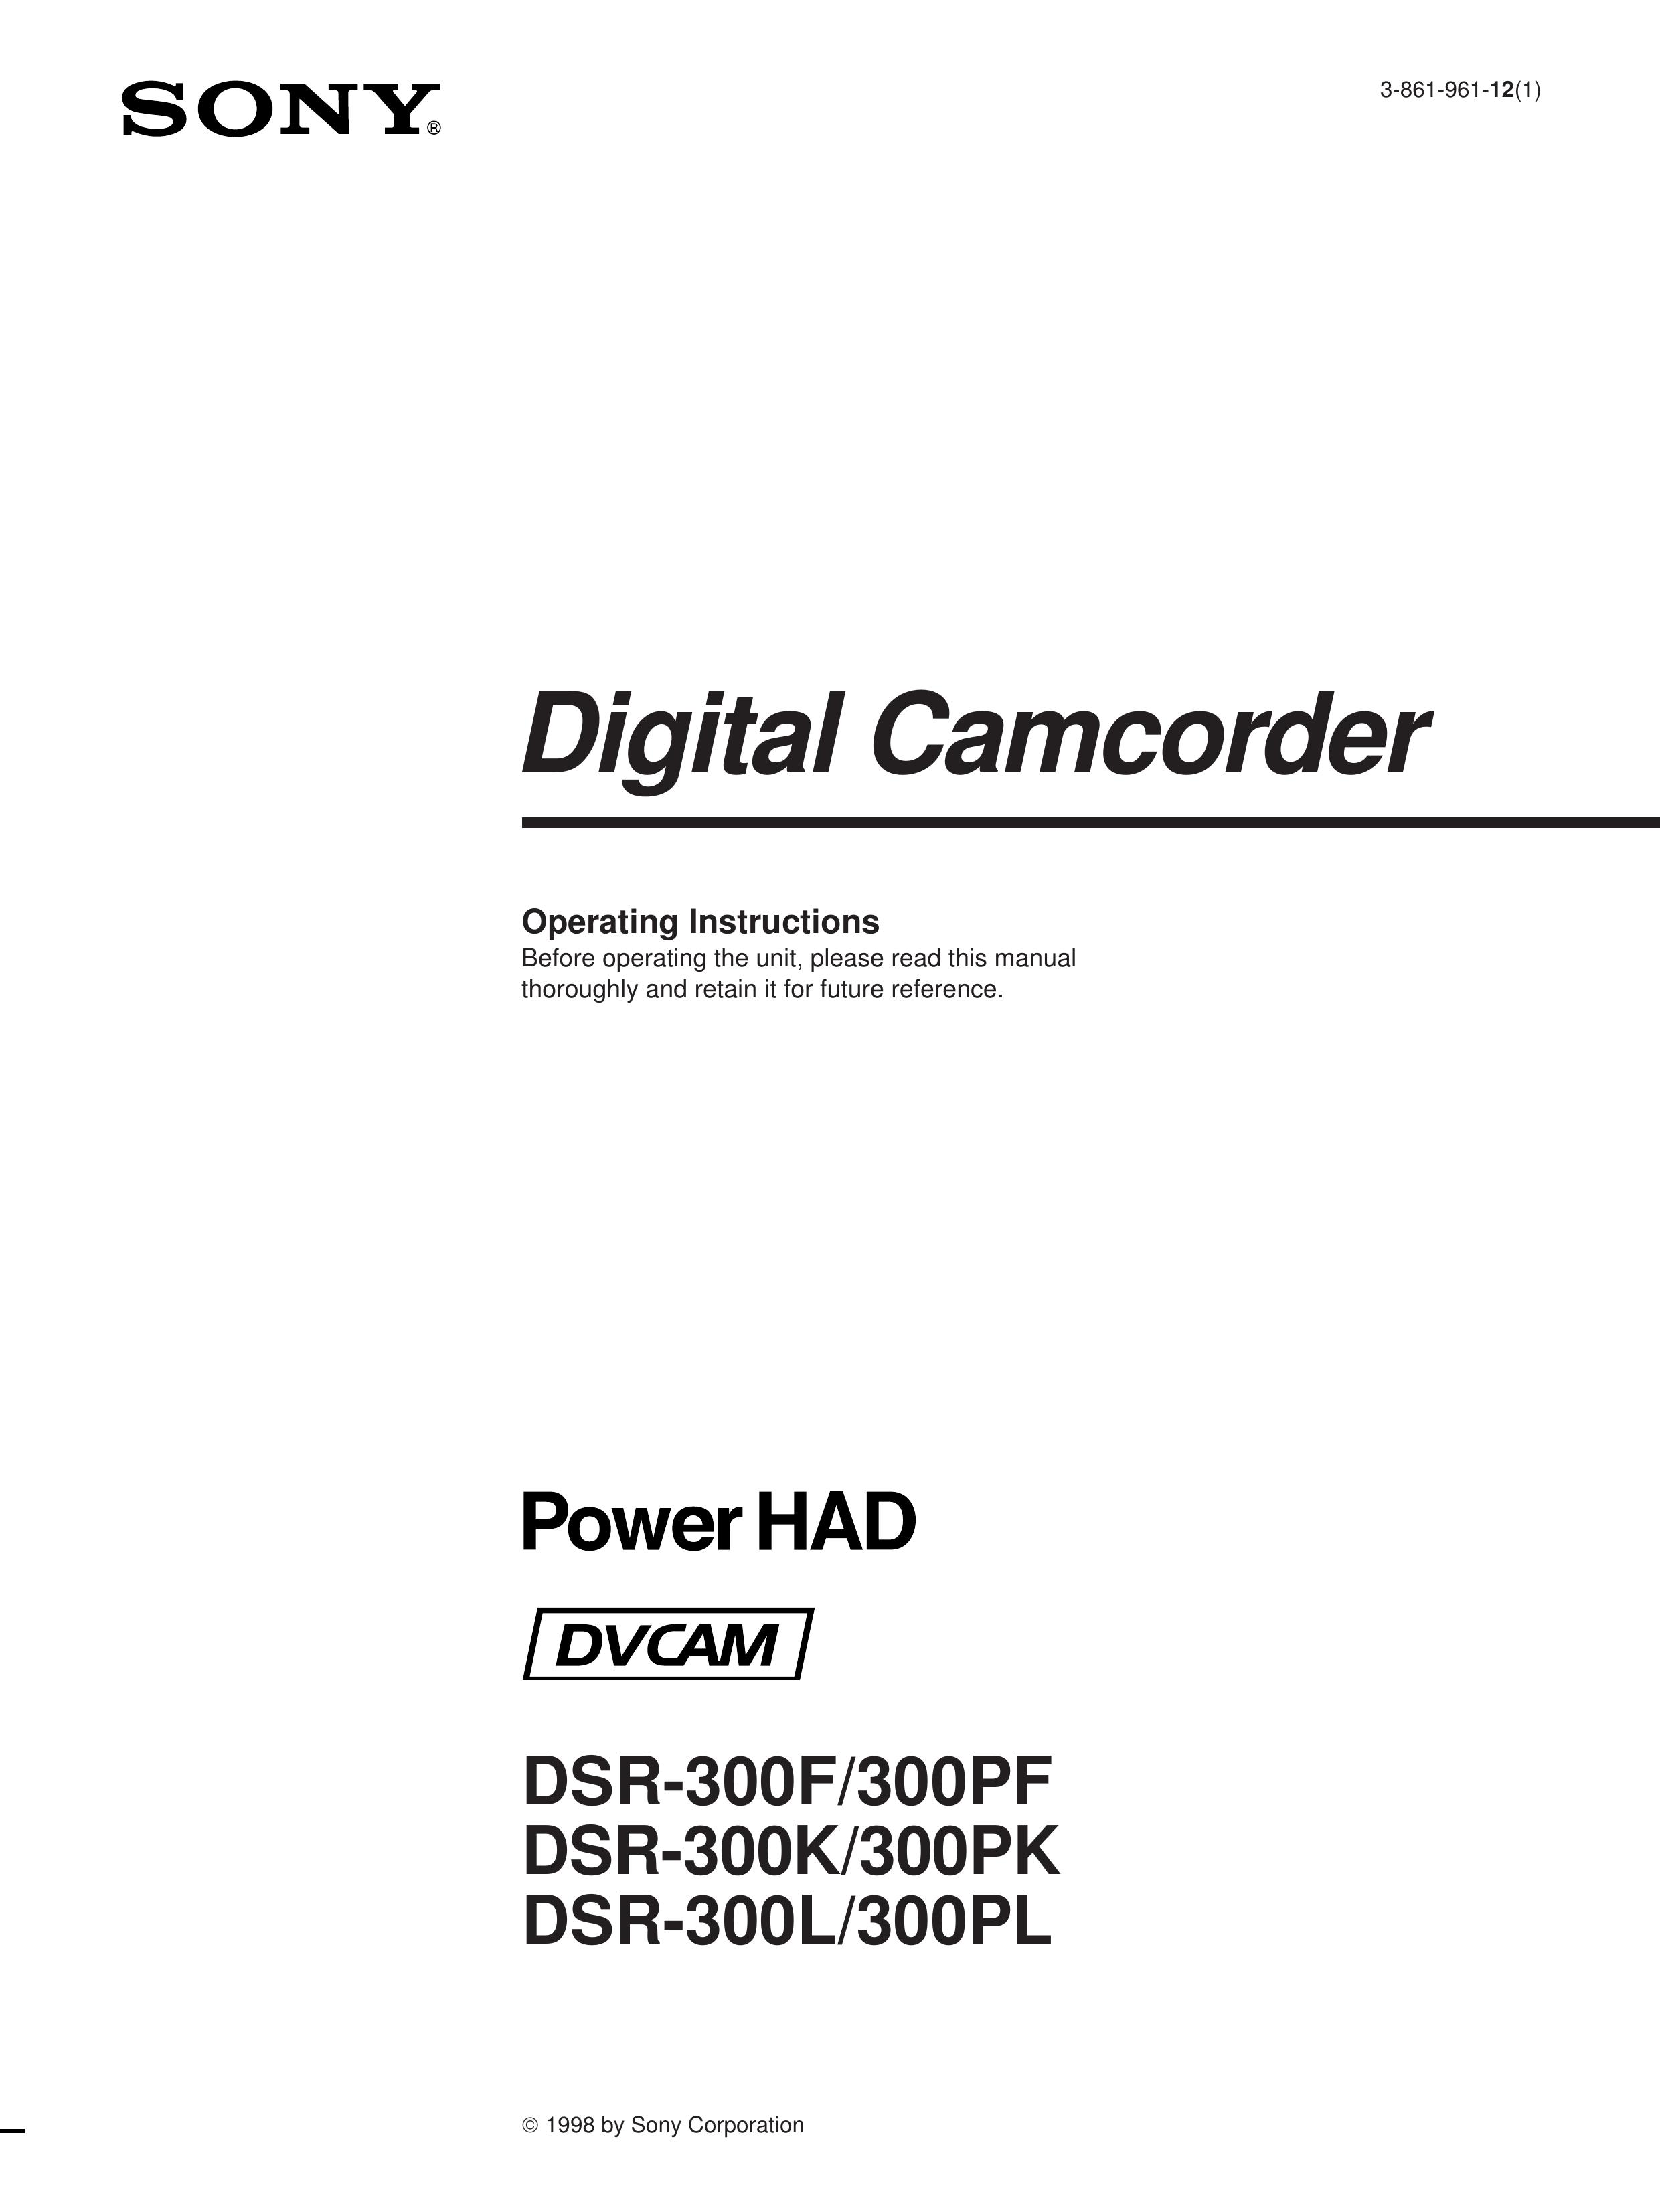 Sony 300PL Camcorder User Manual